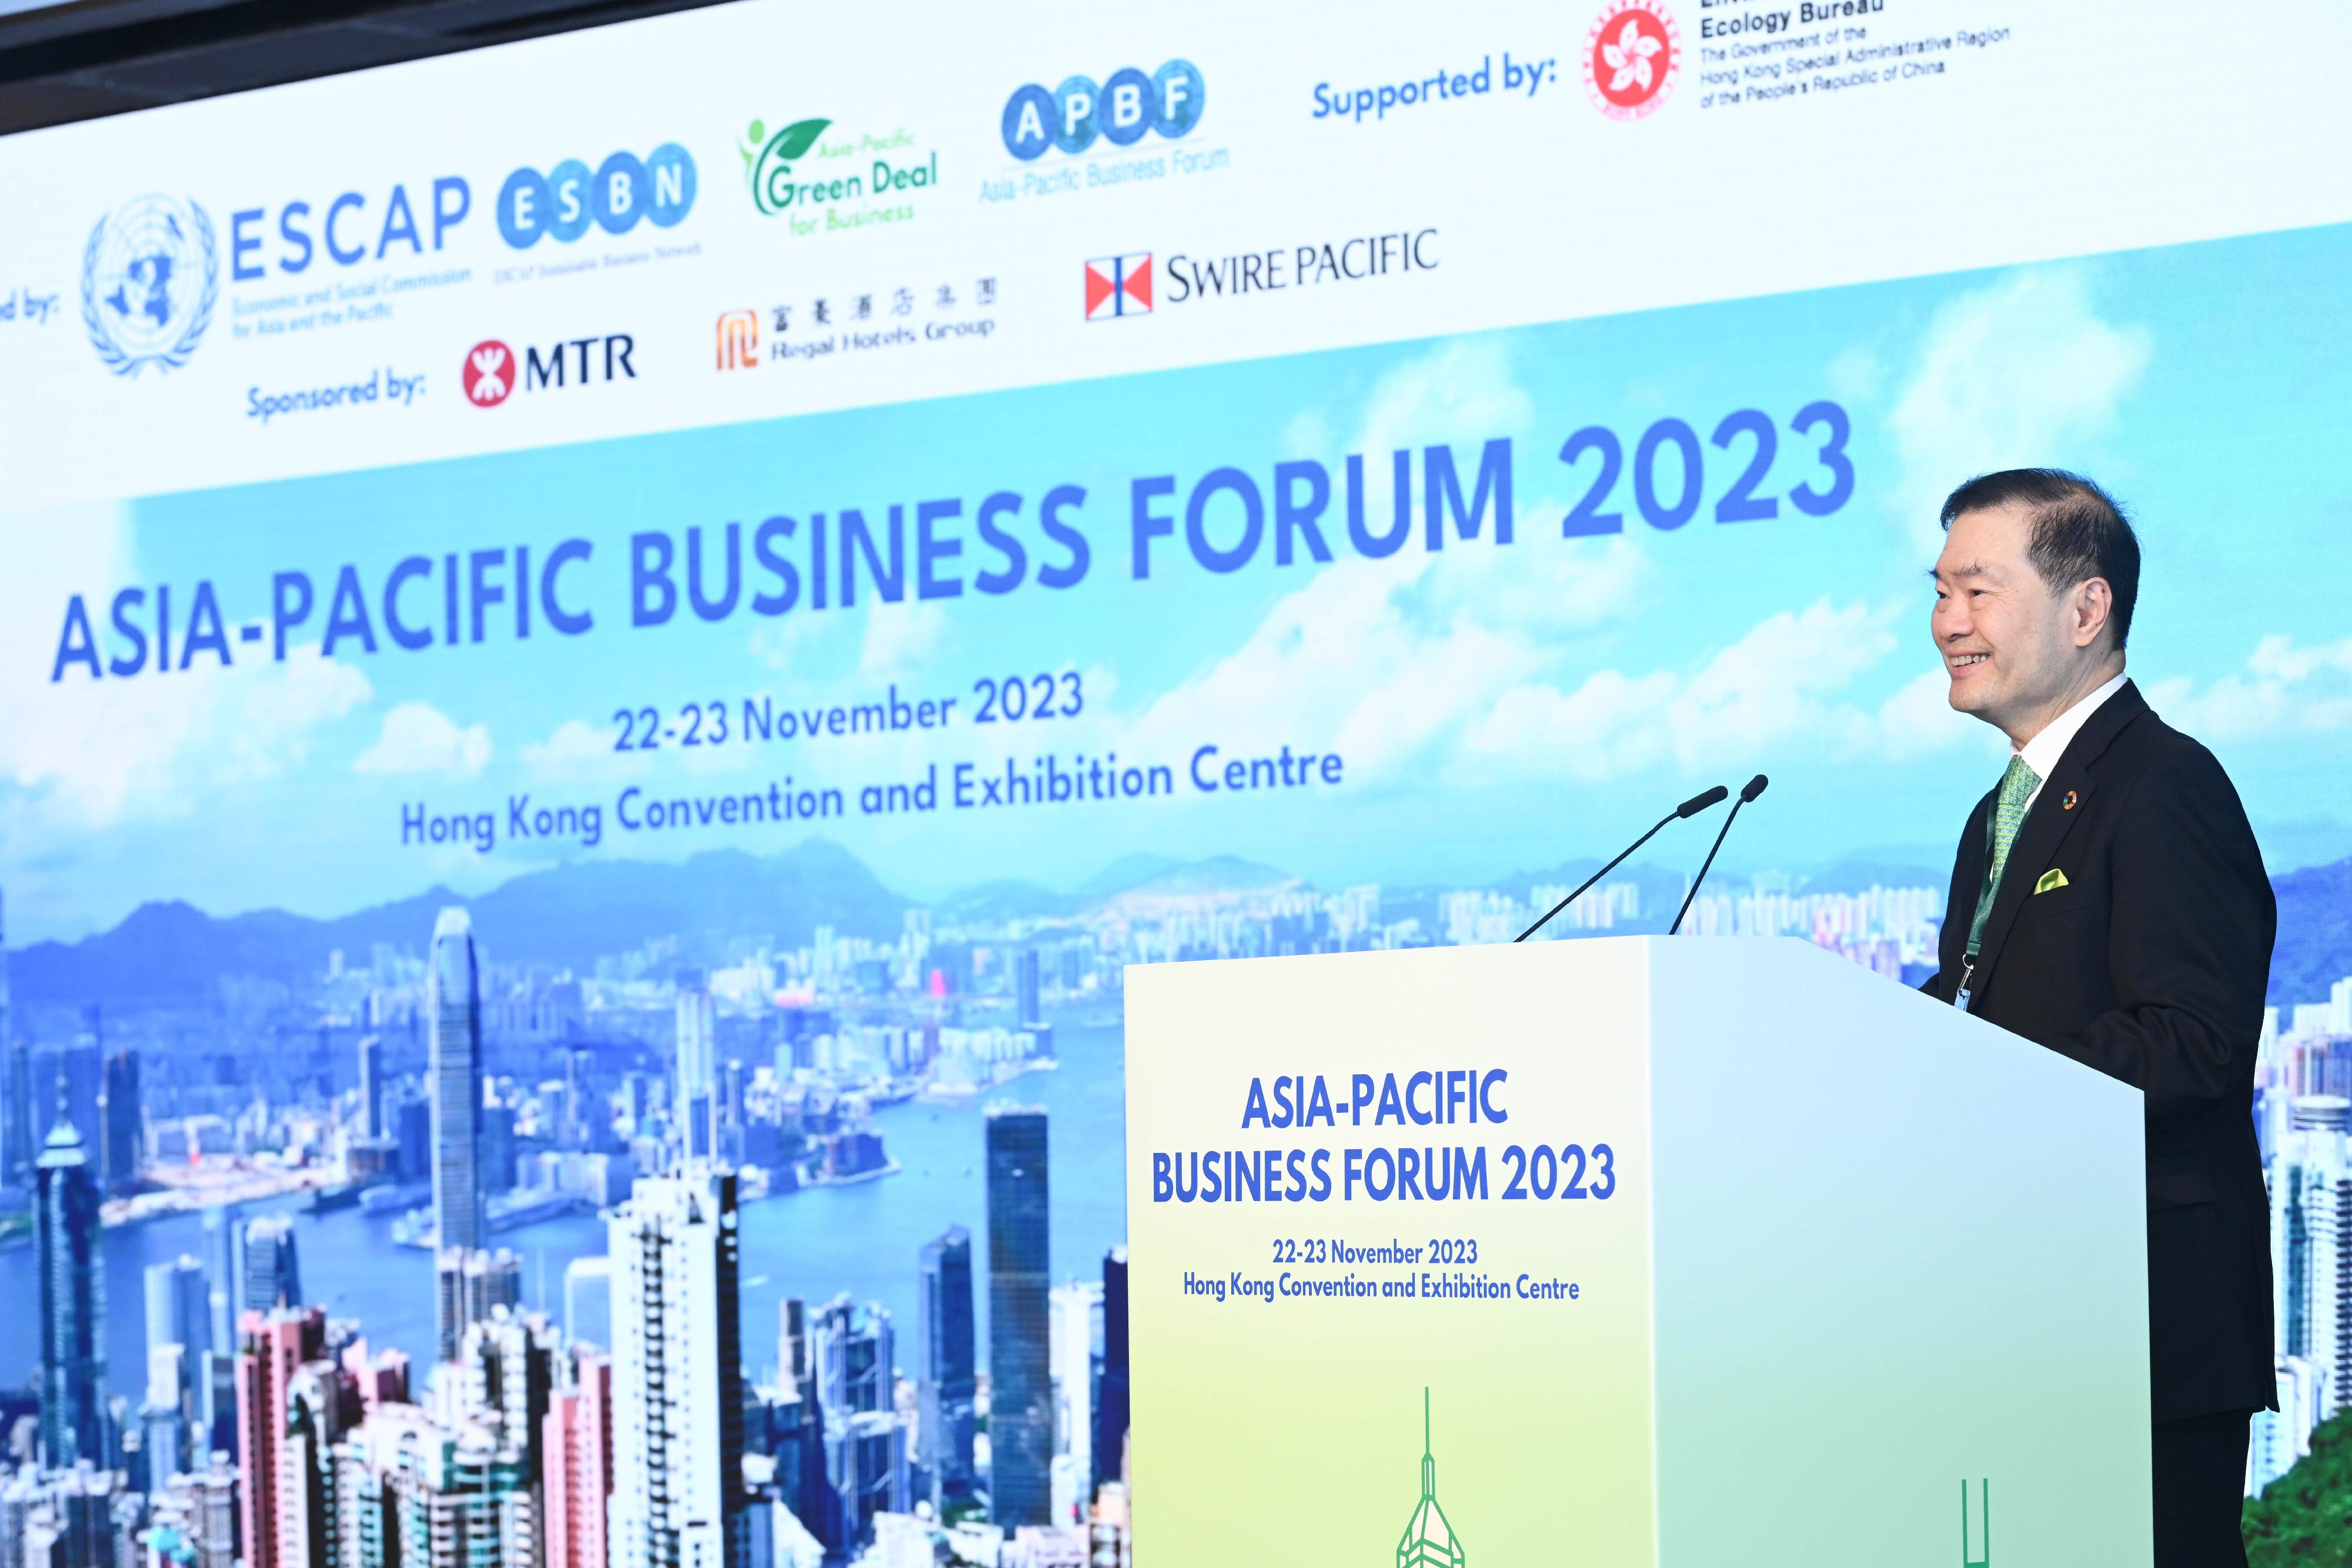 The Chair of the United Nations Economic and Social Commission for Asia and the Pacific Sustainable Business Network, Dr George Lam, delivers welcome statement at the inaugural session of the Asia-Pacific Business Forum 2023 this morning (November 22).